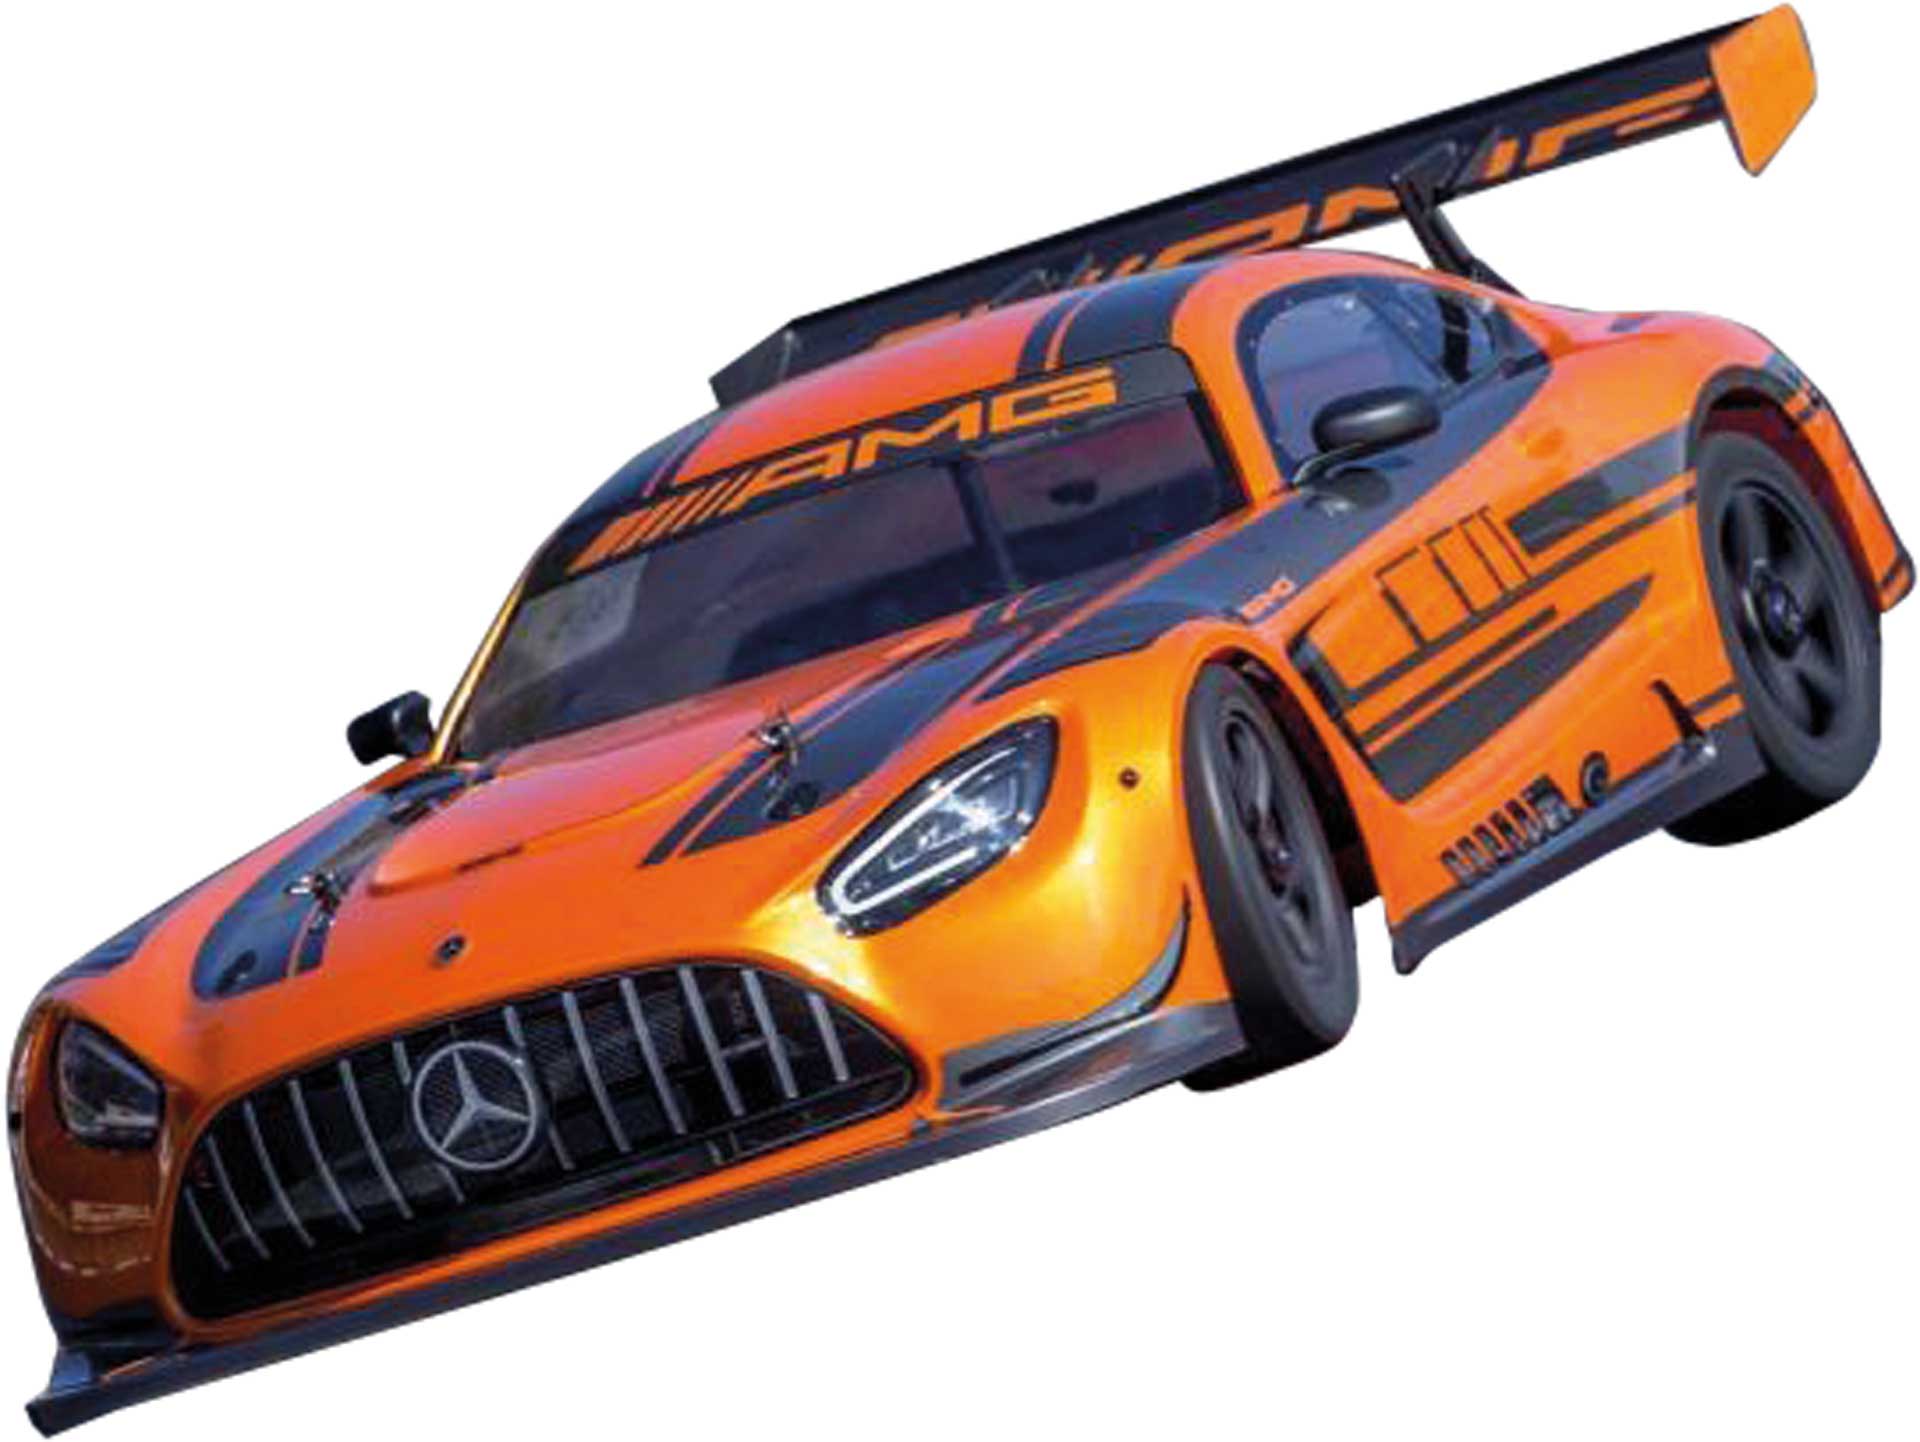 KYOSHO INFERNO GT2 MERCEDES AMG GT3 1:8 RTR EP BRUSHLESS 4WD